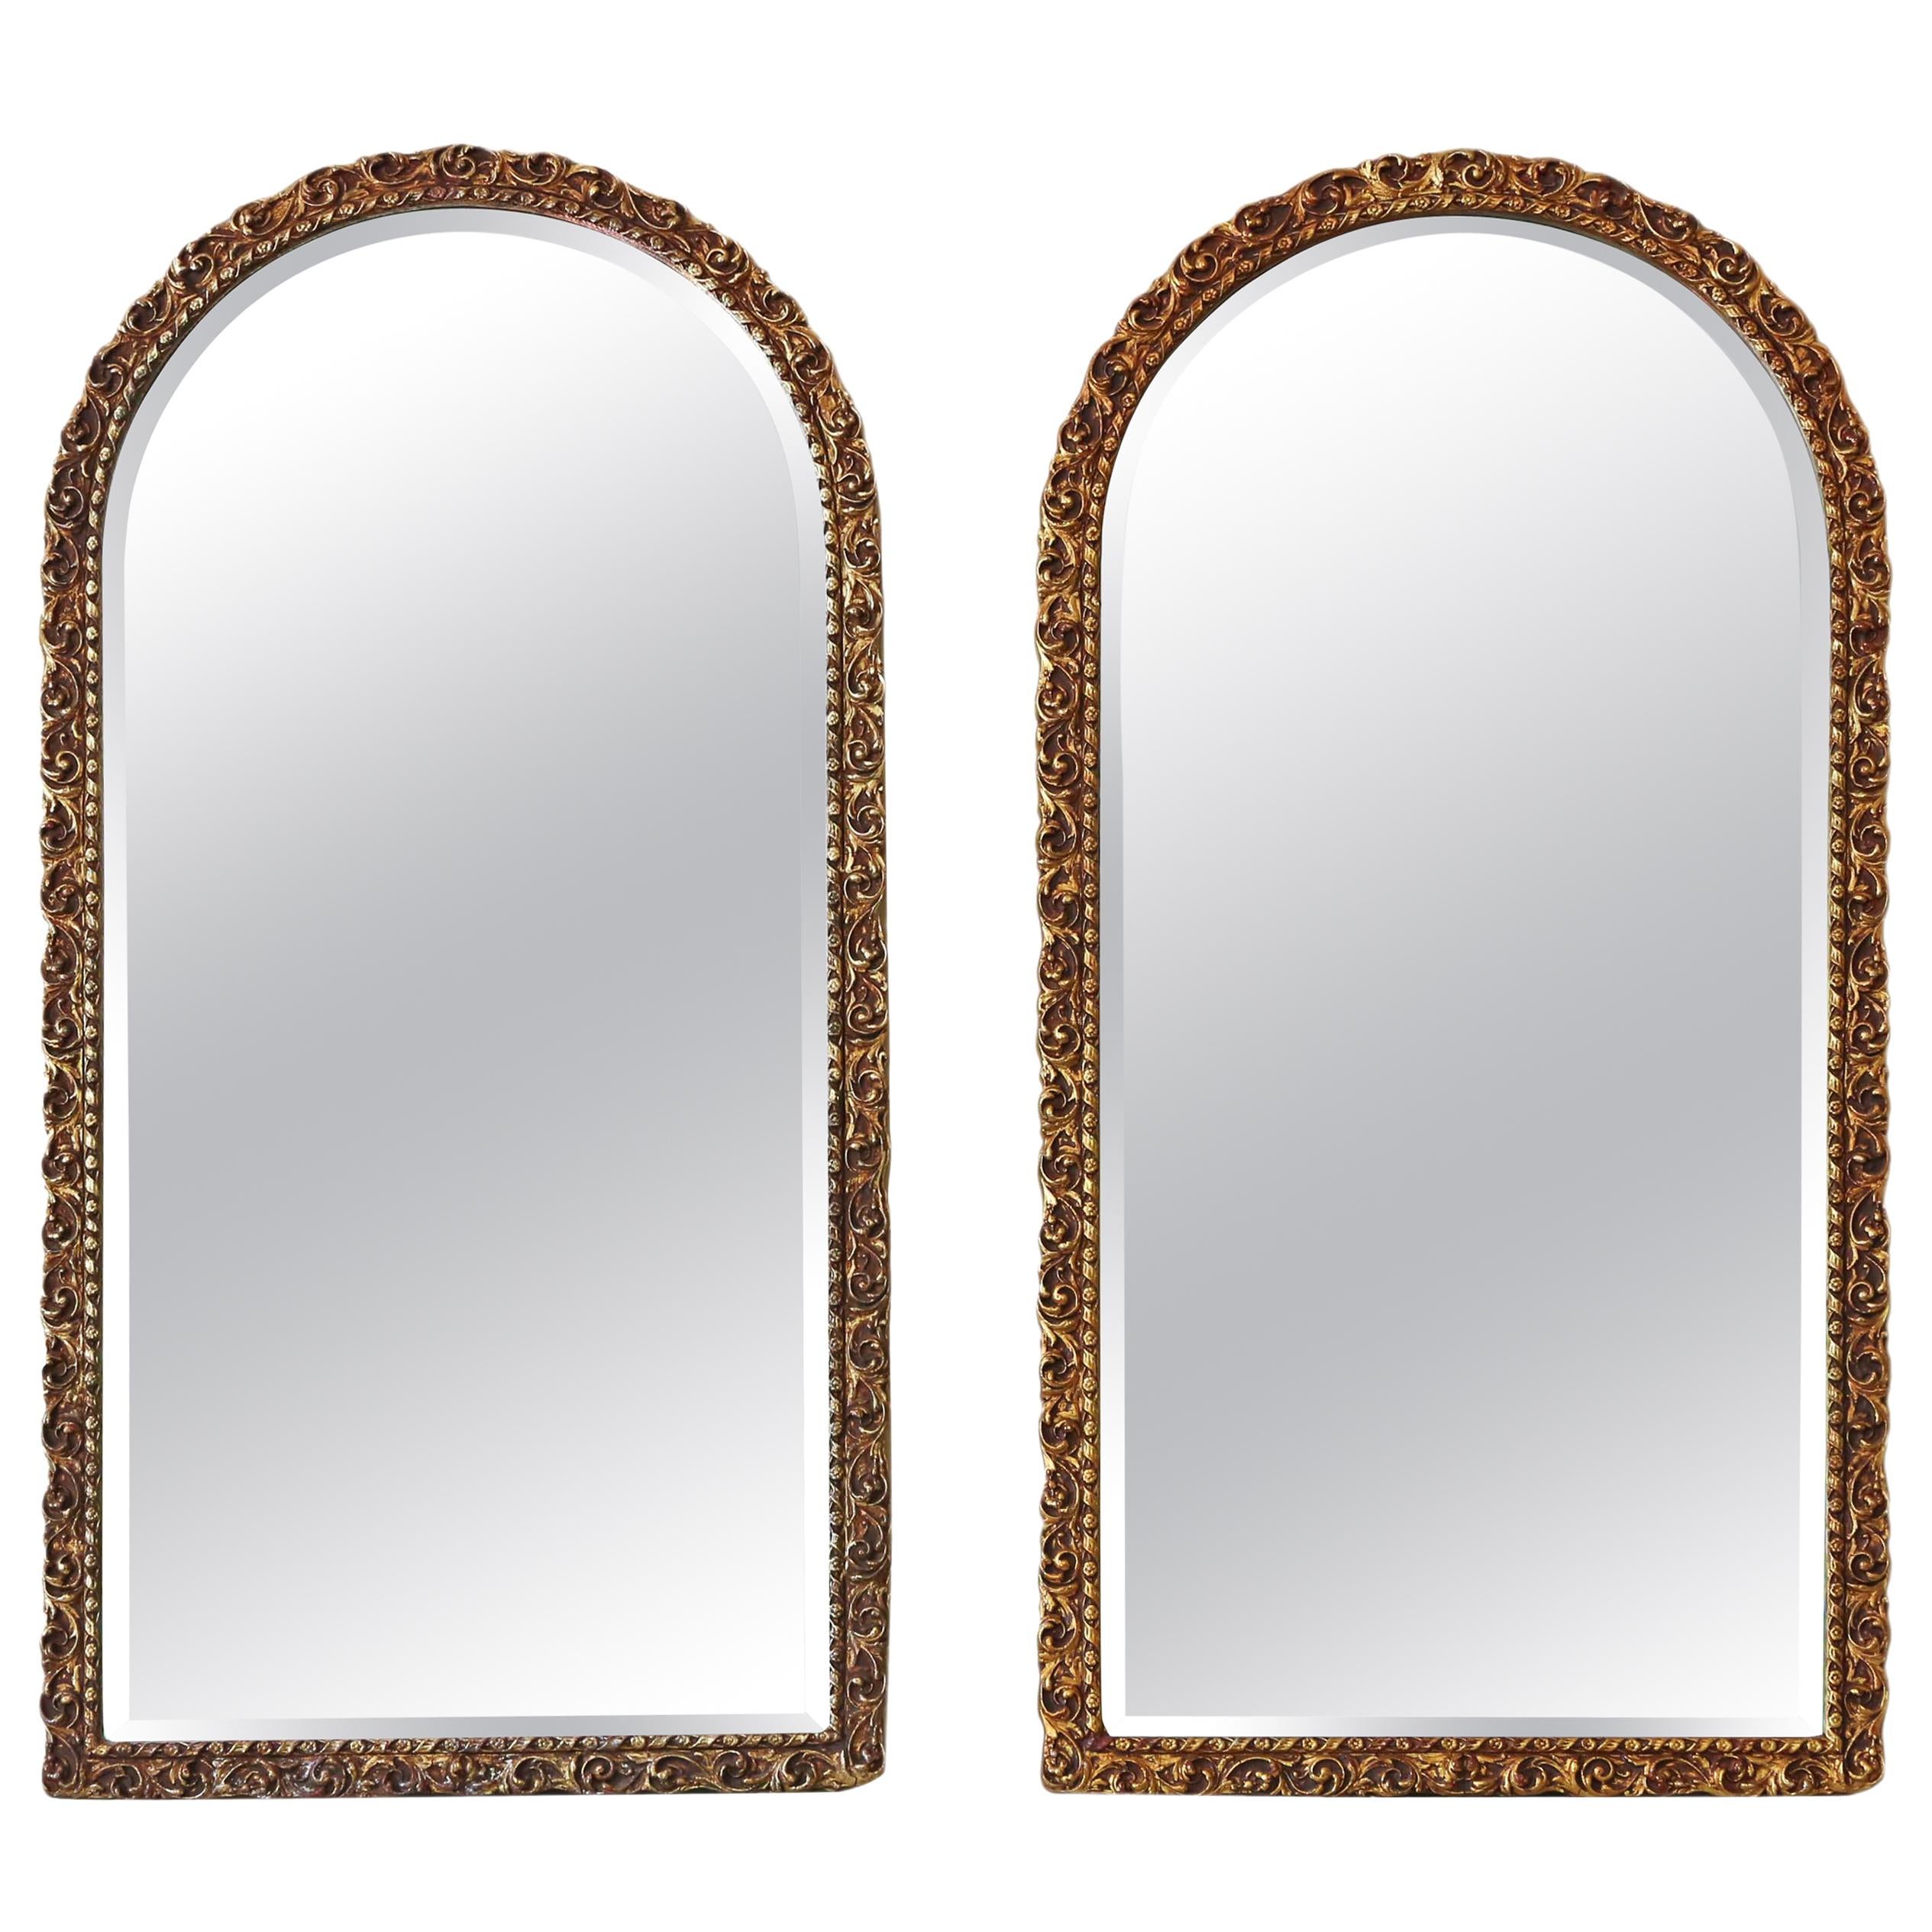 Pair of Large Arched Gilt Overmantle or Wall Mirrors